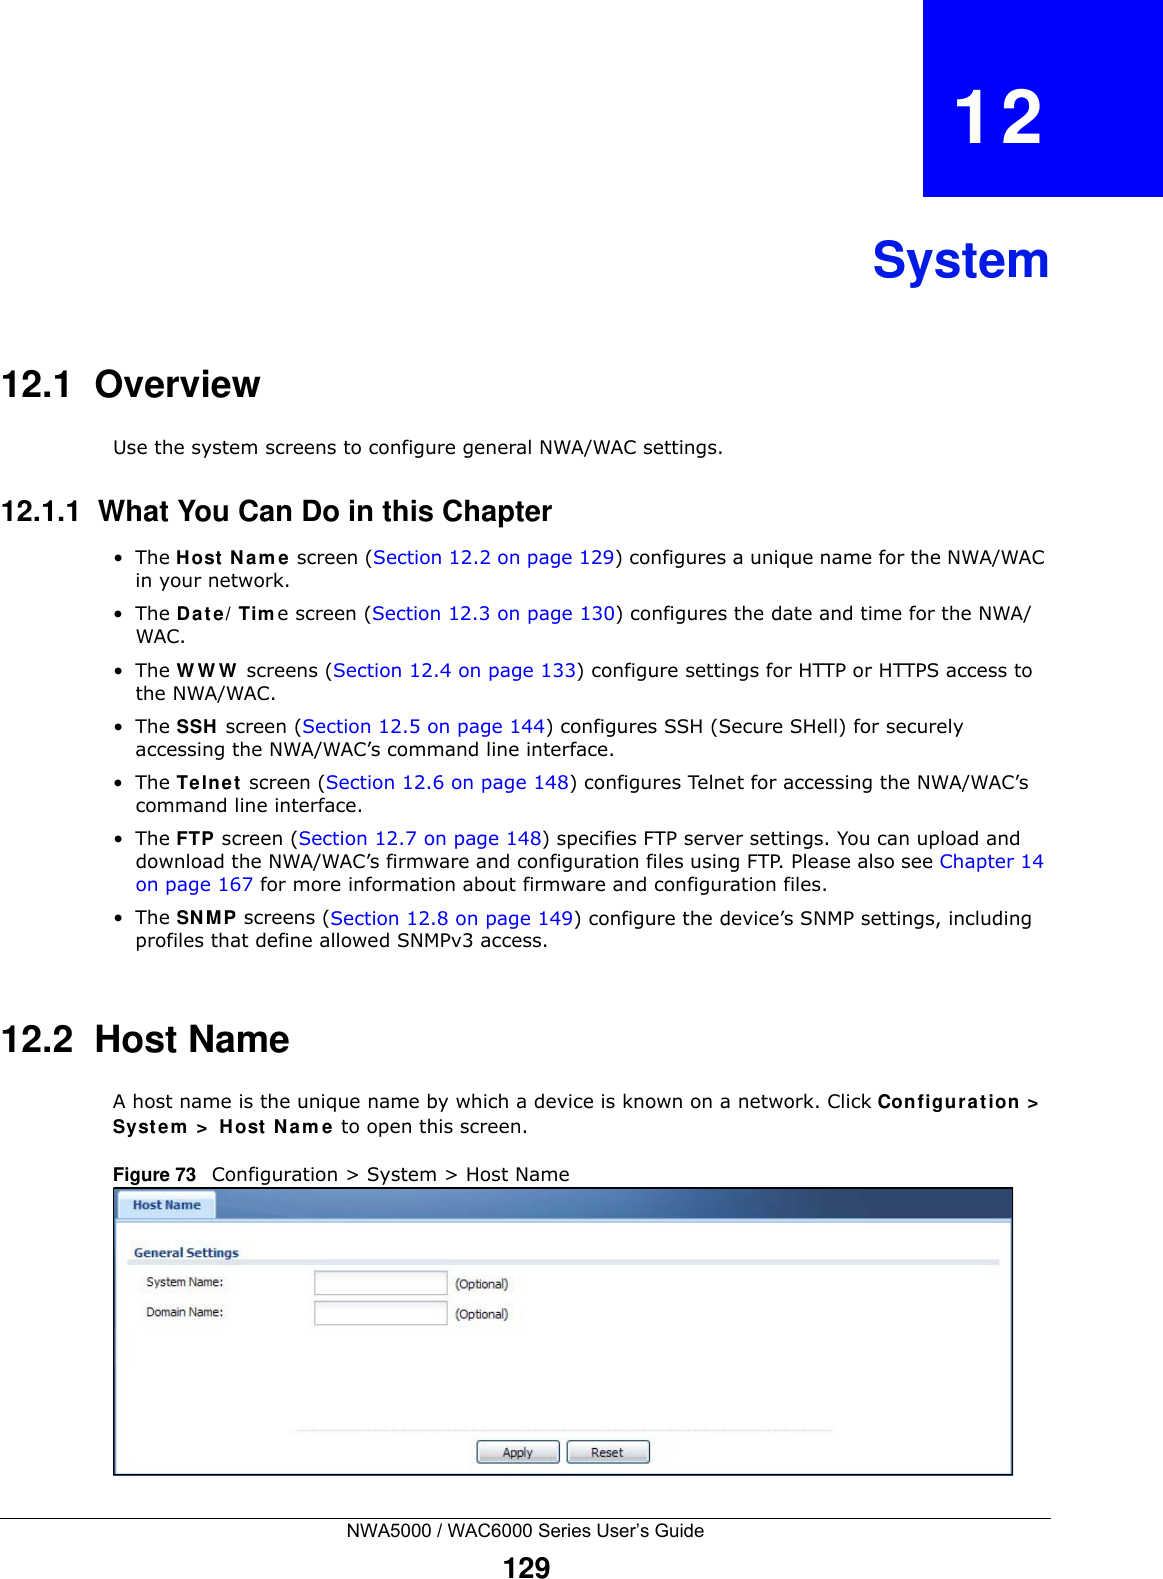 NWA5000 / WAC6000 Series User’s Guide129CHAPTER   12System12.1  OverviewUse the system screens to configure general NWA/WAC settings. 12.1.1  What You Can Do in this Chapter•The H ost  Nam e  screen (Section 12.2 on page 129) configures a unique name for the NWA/WAC in your network.•The D at e/ Tim e screen (Section 12.3 on page 130) configures the date and time for the NWA/WAC.•The WWW screens (Section 12.4 on page 133) configure settings for HTTP or HTTPS access to the NWA/WAC. •The SSH  screen (Section 12.5 on page 144) configures SSH (Secure SHell) for securely accessing the NWA/WAC’s command line interface. •The Telne t screen (Section 12.6 on page 148) configures Telnet for accessing the NWA/WAC’s command line interface. •The FTP screen (Section 12.7 on page 148) specifies FTP server settings. You can upload and download the NWA/WAC’s firmware and configuration files using FTP. Please also see Chapter 14 on page 167 for more information about firmware and configuration files.•The SN M P screens (Section 12.8 on page 149) configure the device’s SNMP settings, including profiles that define allowed SNMPv3 access.12.2  Host NameA host name is the unique name by which a device is known on a network. Click Configur at ion &gt;  Syst em  &gt;  H ost  Nam e  to open this screen.Figure 73   Configuration &gt; System &gt; Host Name